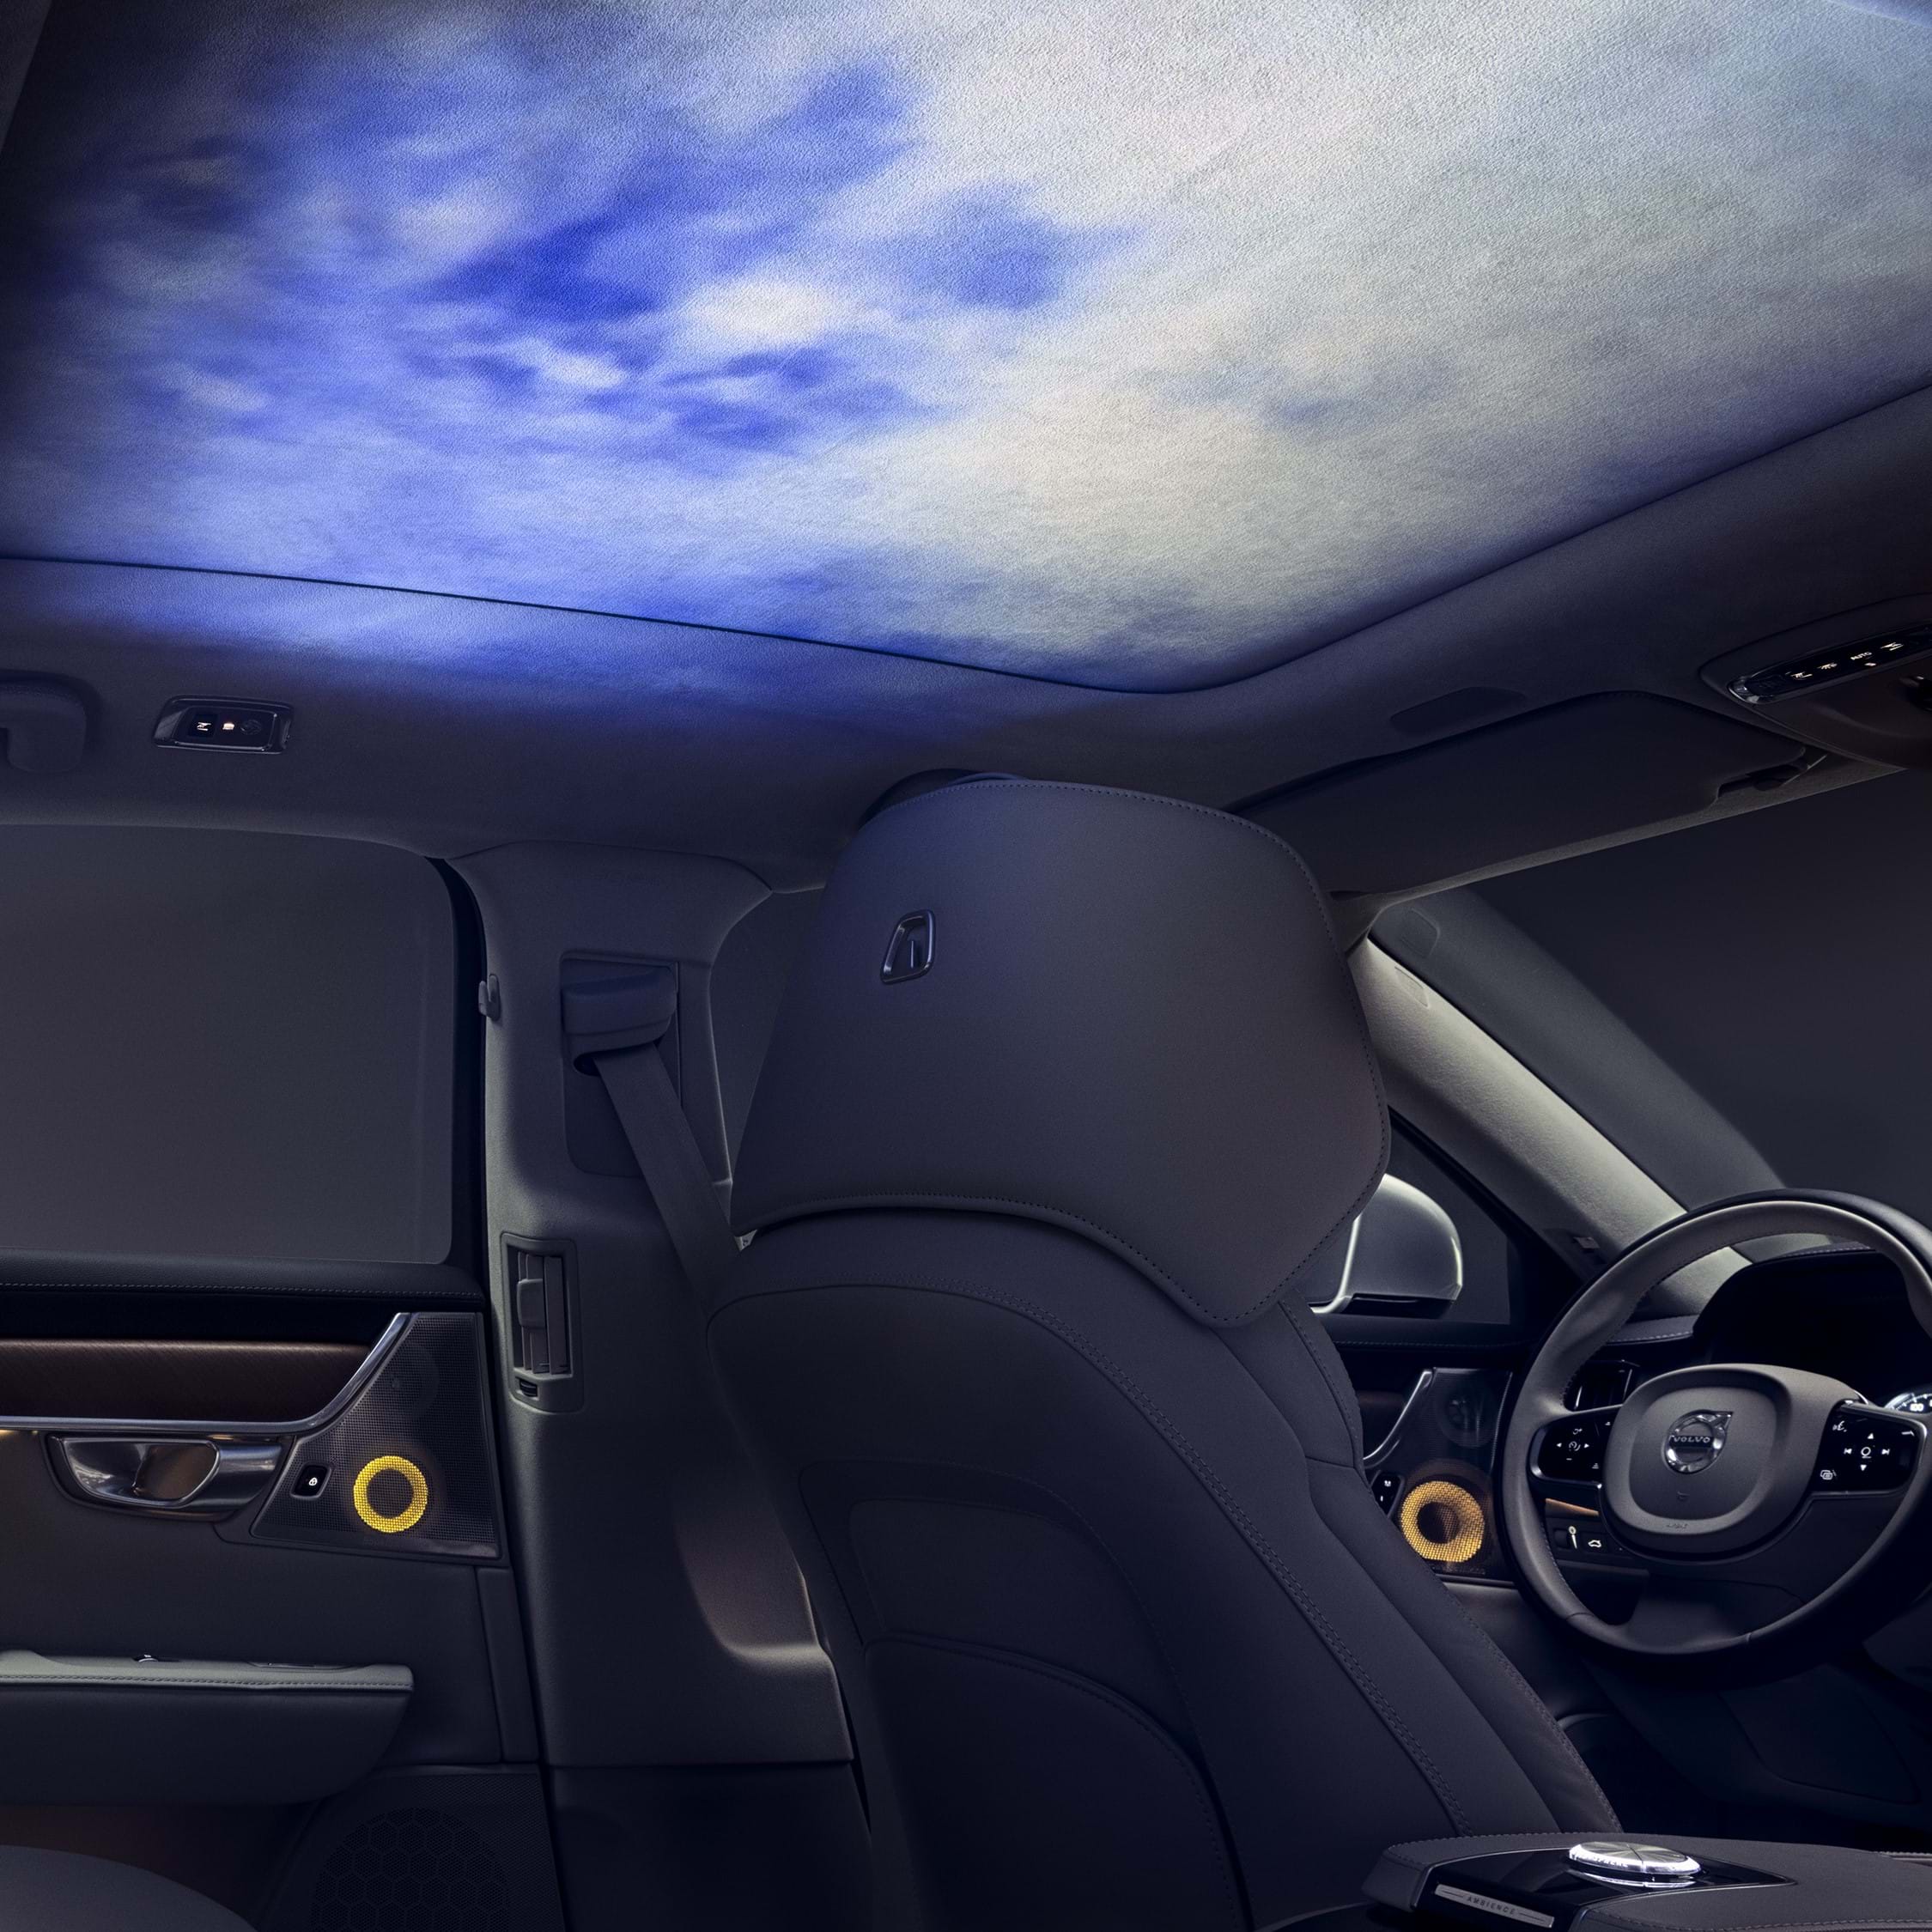 Interior of Volvo with ambient light projected onto interior roof